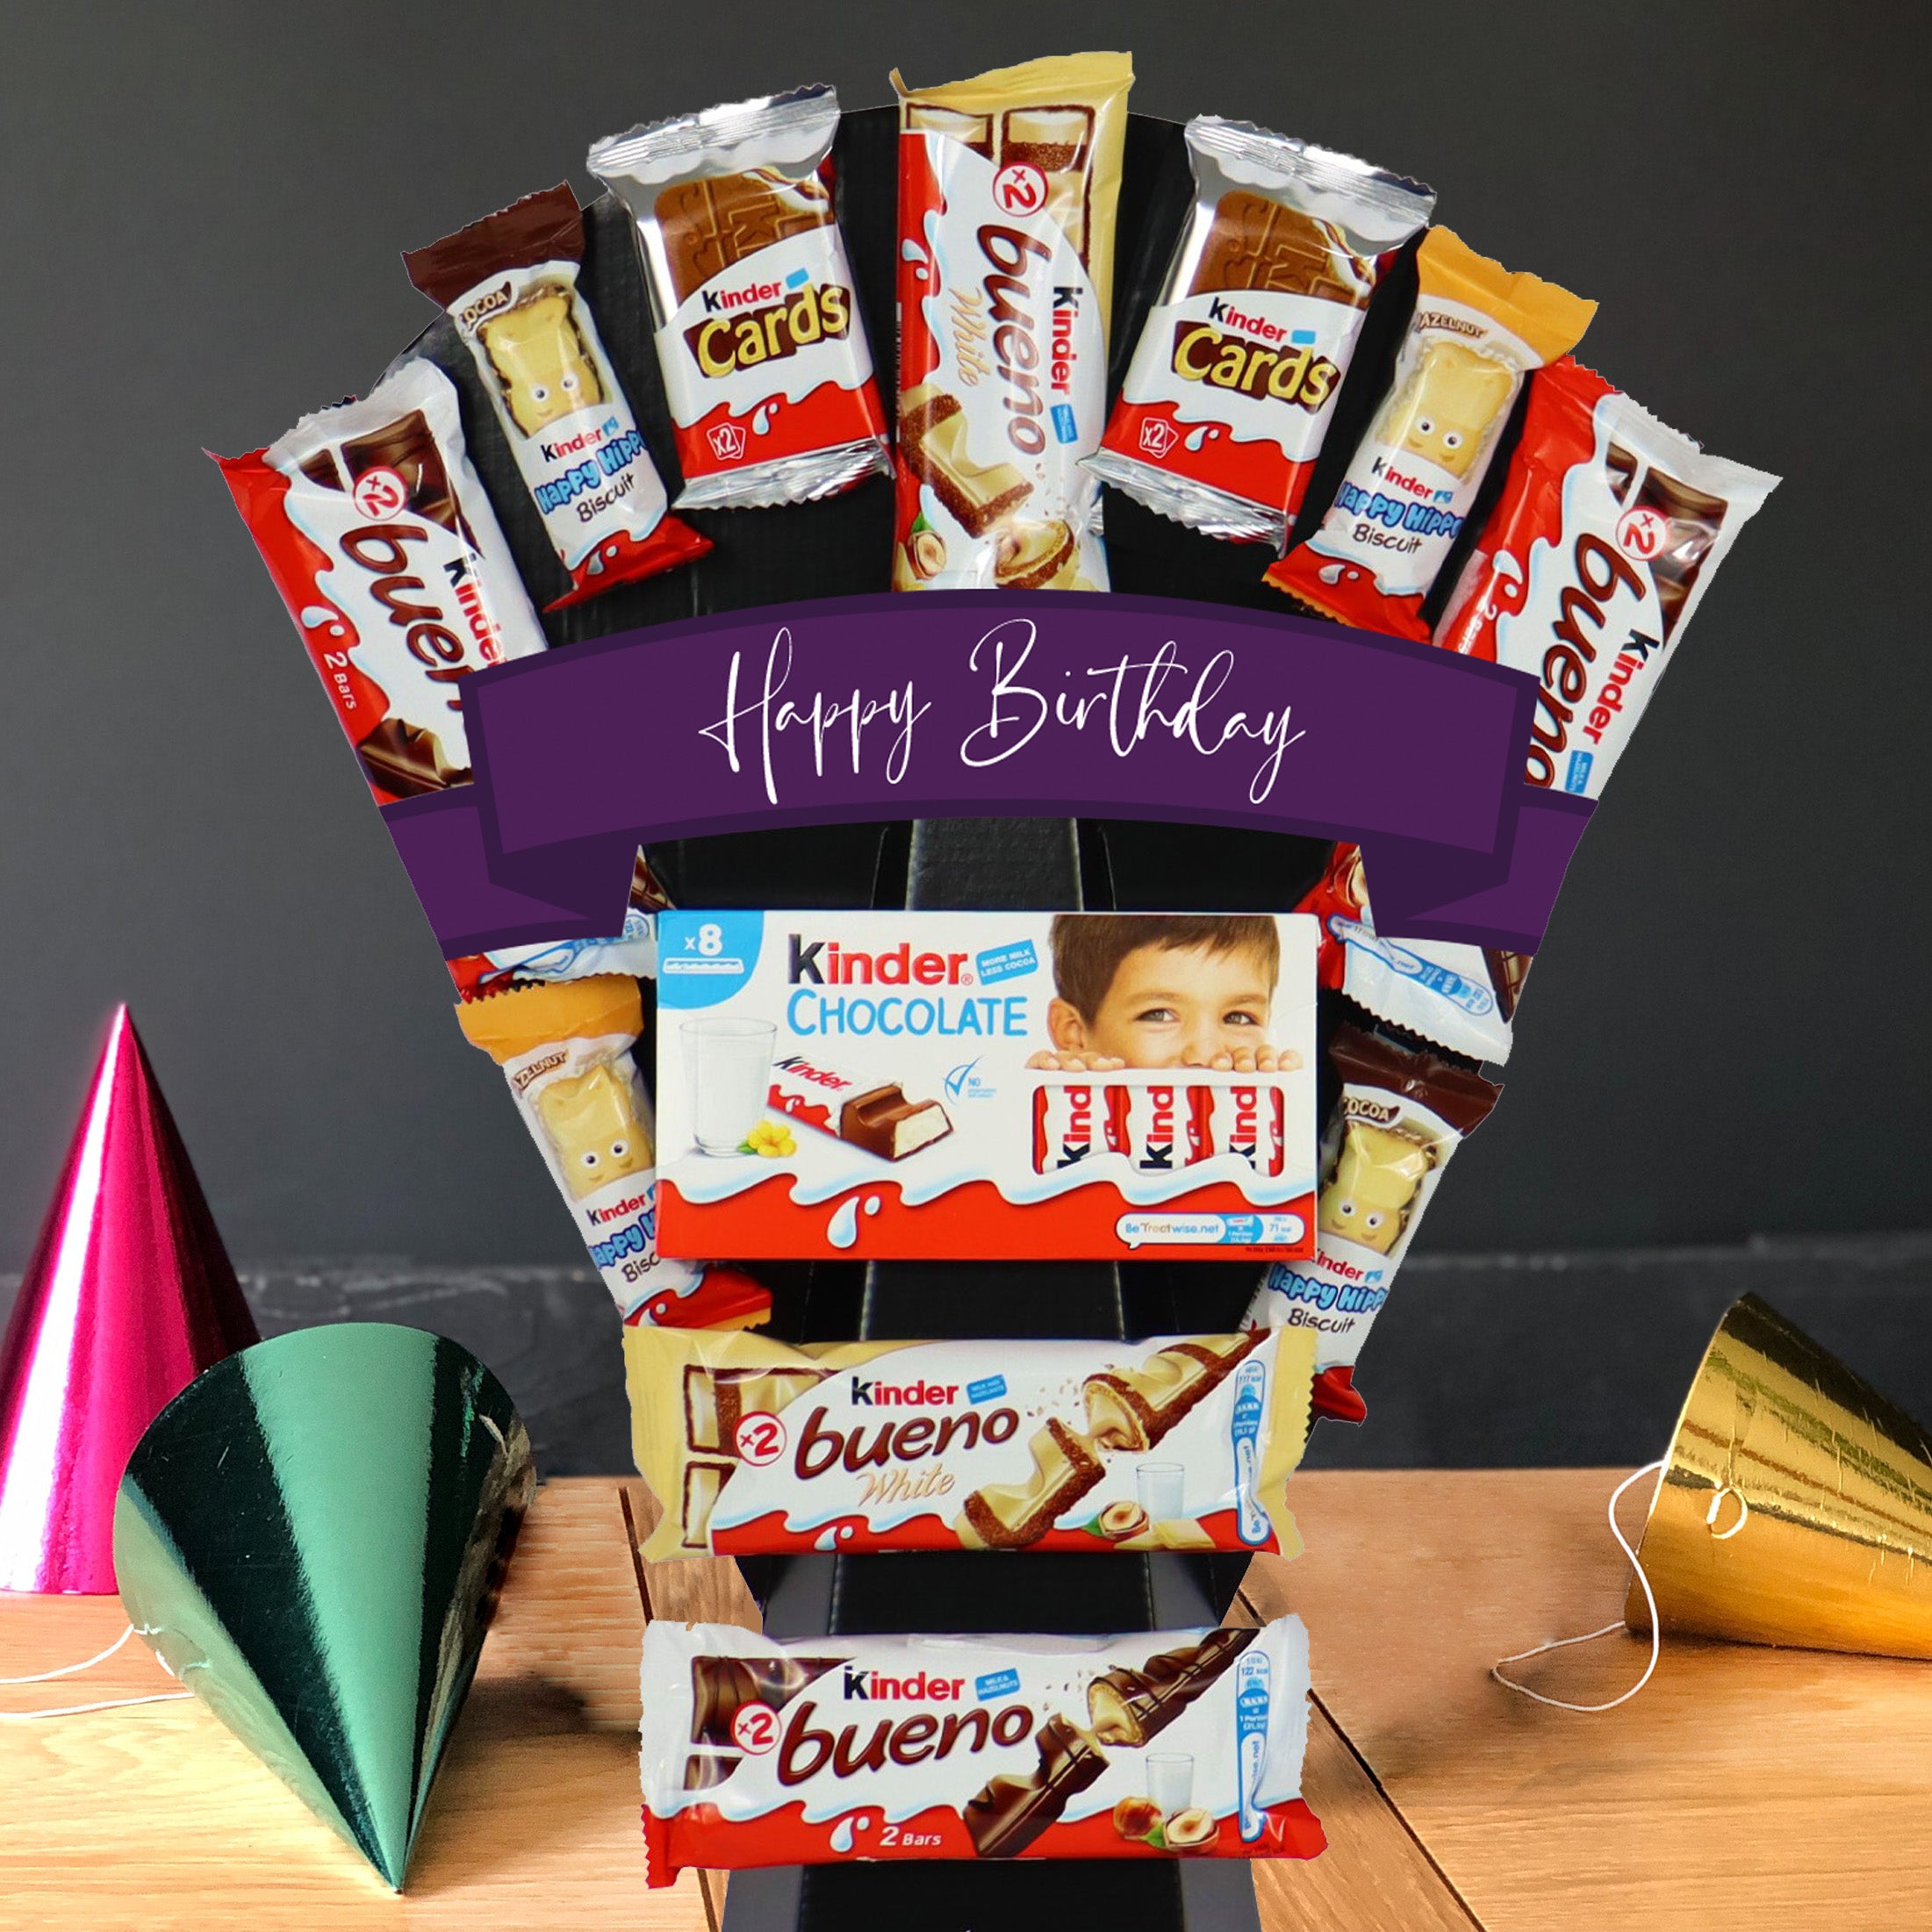 Large Kinder Happy Birthday Chocolate Bouquet With Bueno, Cards, Happy Hippos & More - Perfect Birthday Gift